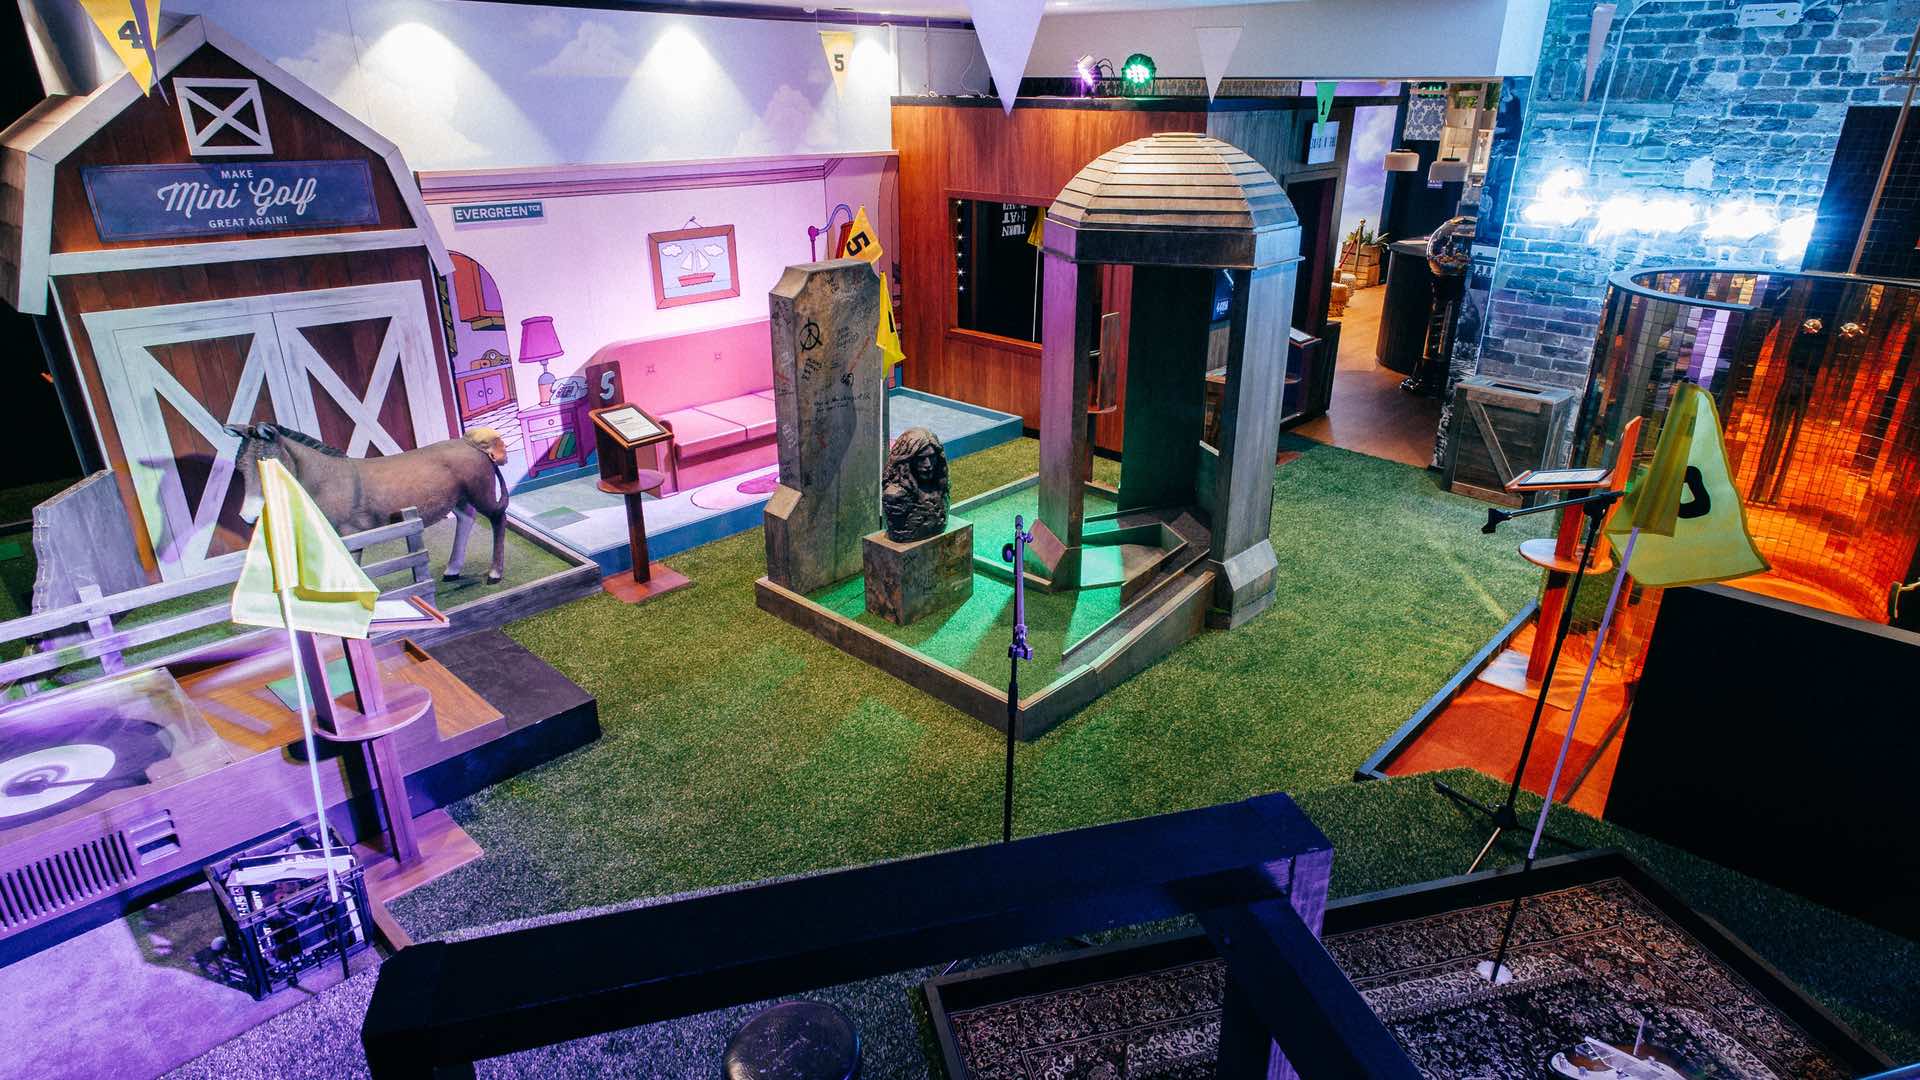 Sydney's Hugely Popular Mini-Golf Bar Holey Moley Is Opening a Second Venue in Castle Hill